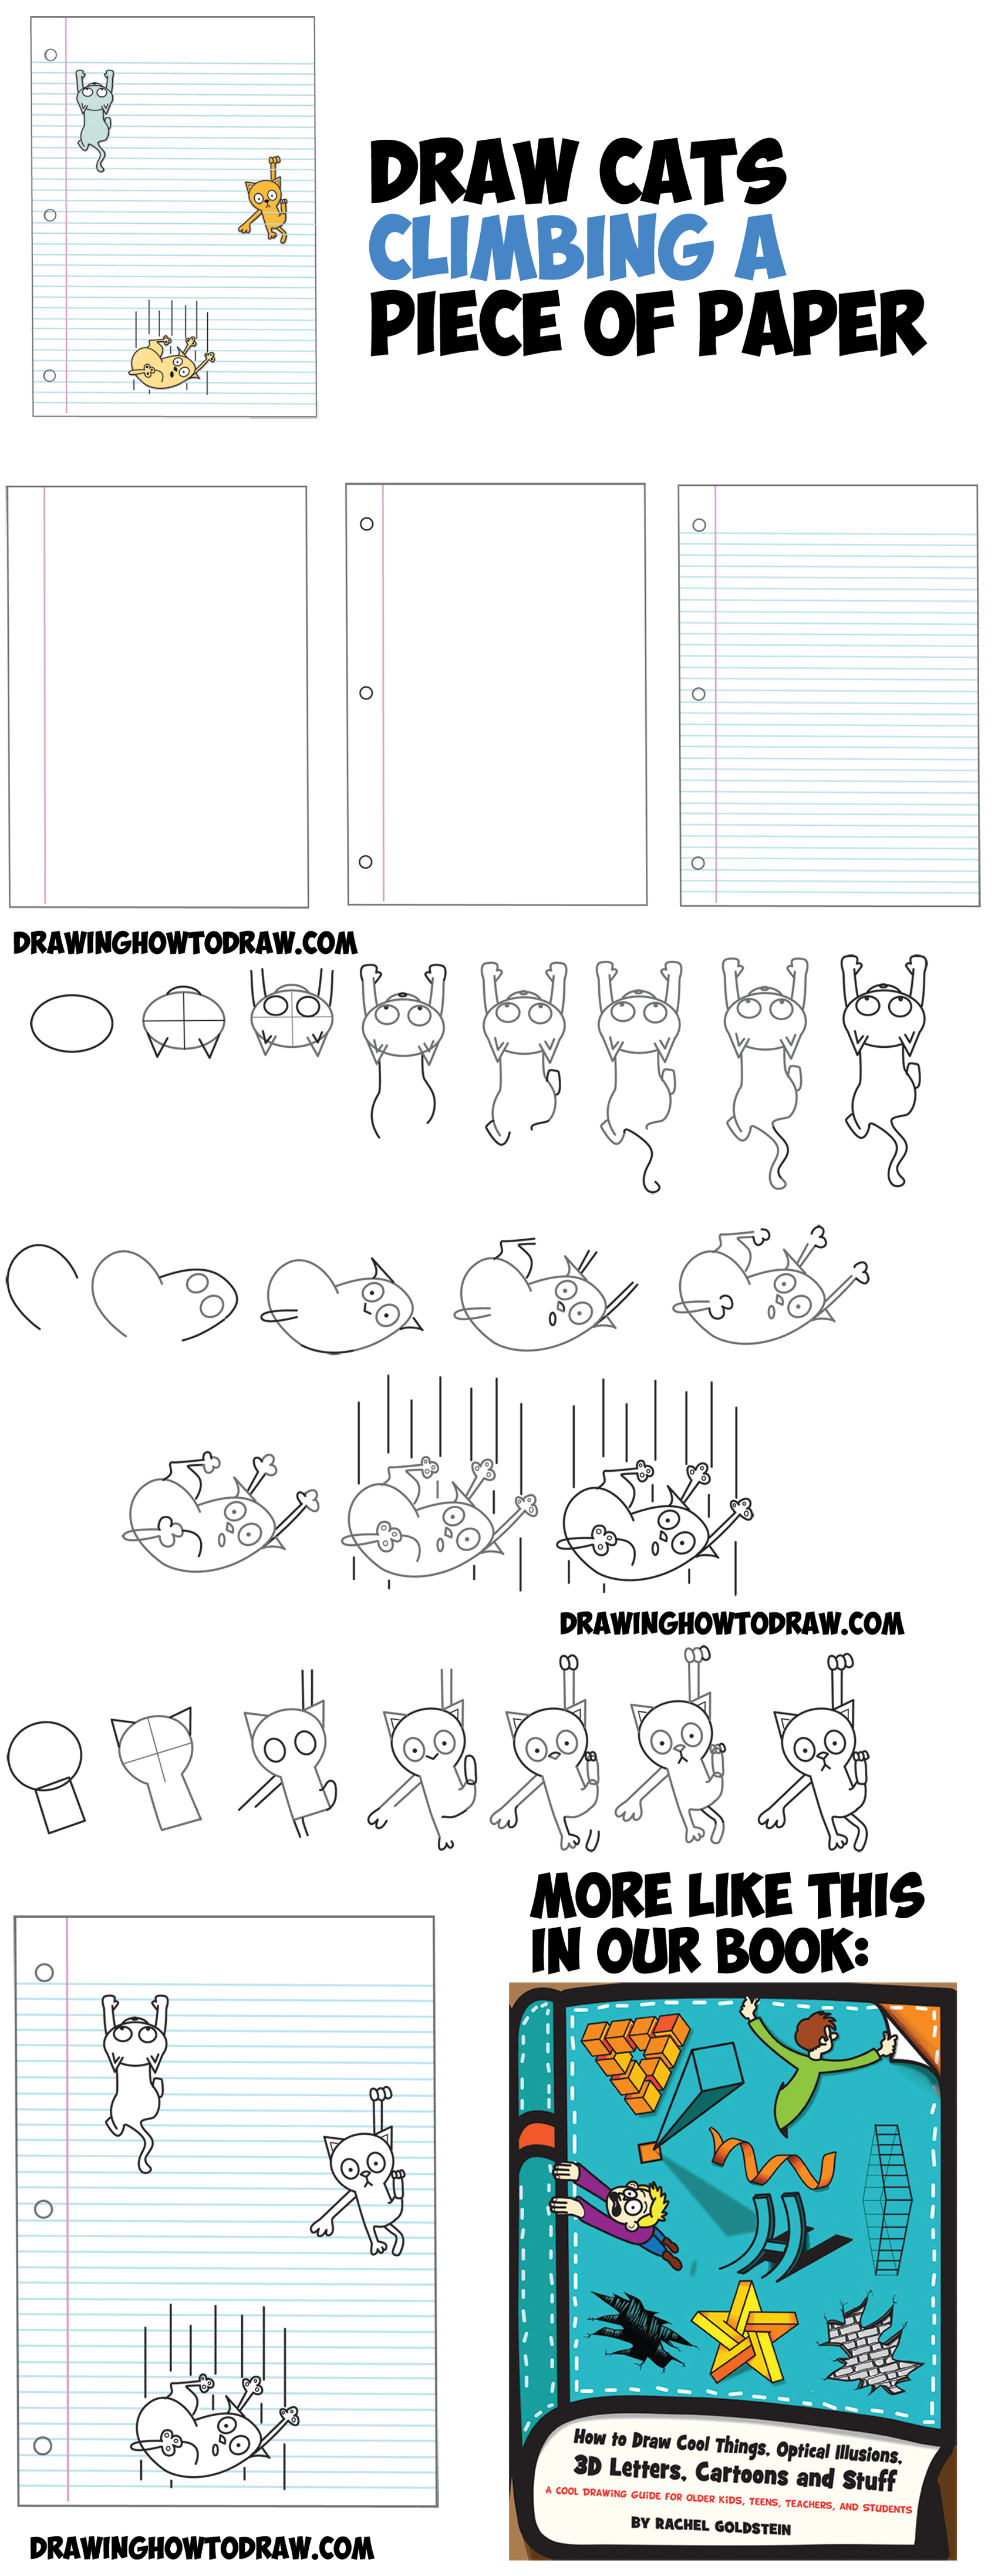 How to Draw Cartoon Cats Climbing Lined Paper 3D Optical Illusion Step by Step Drawing Tutorial for Kids